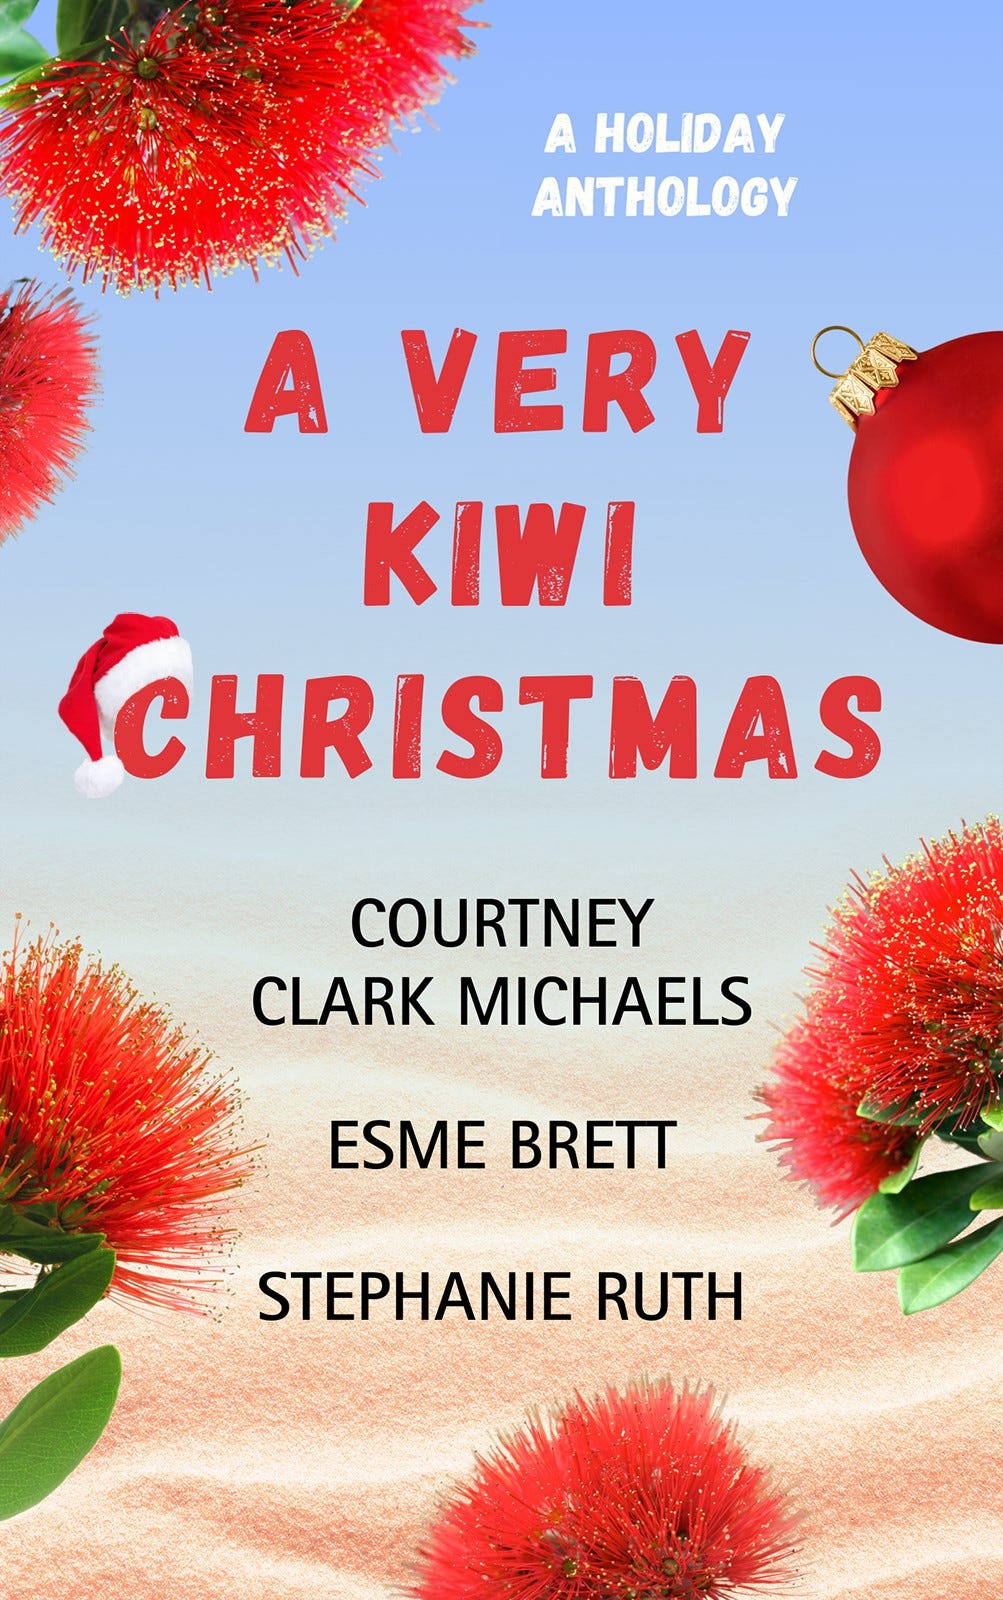 Book Cover for A Very Kiwi Christmas features red flowers of the pohutakawa tree and a red bauble and sand and blue skies